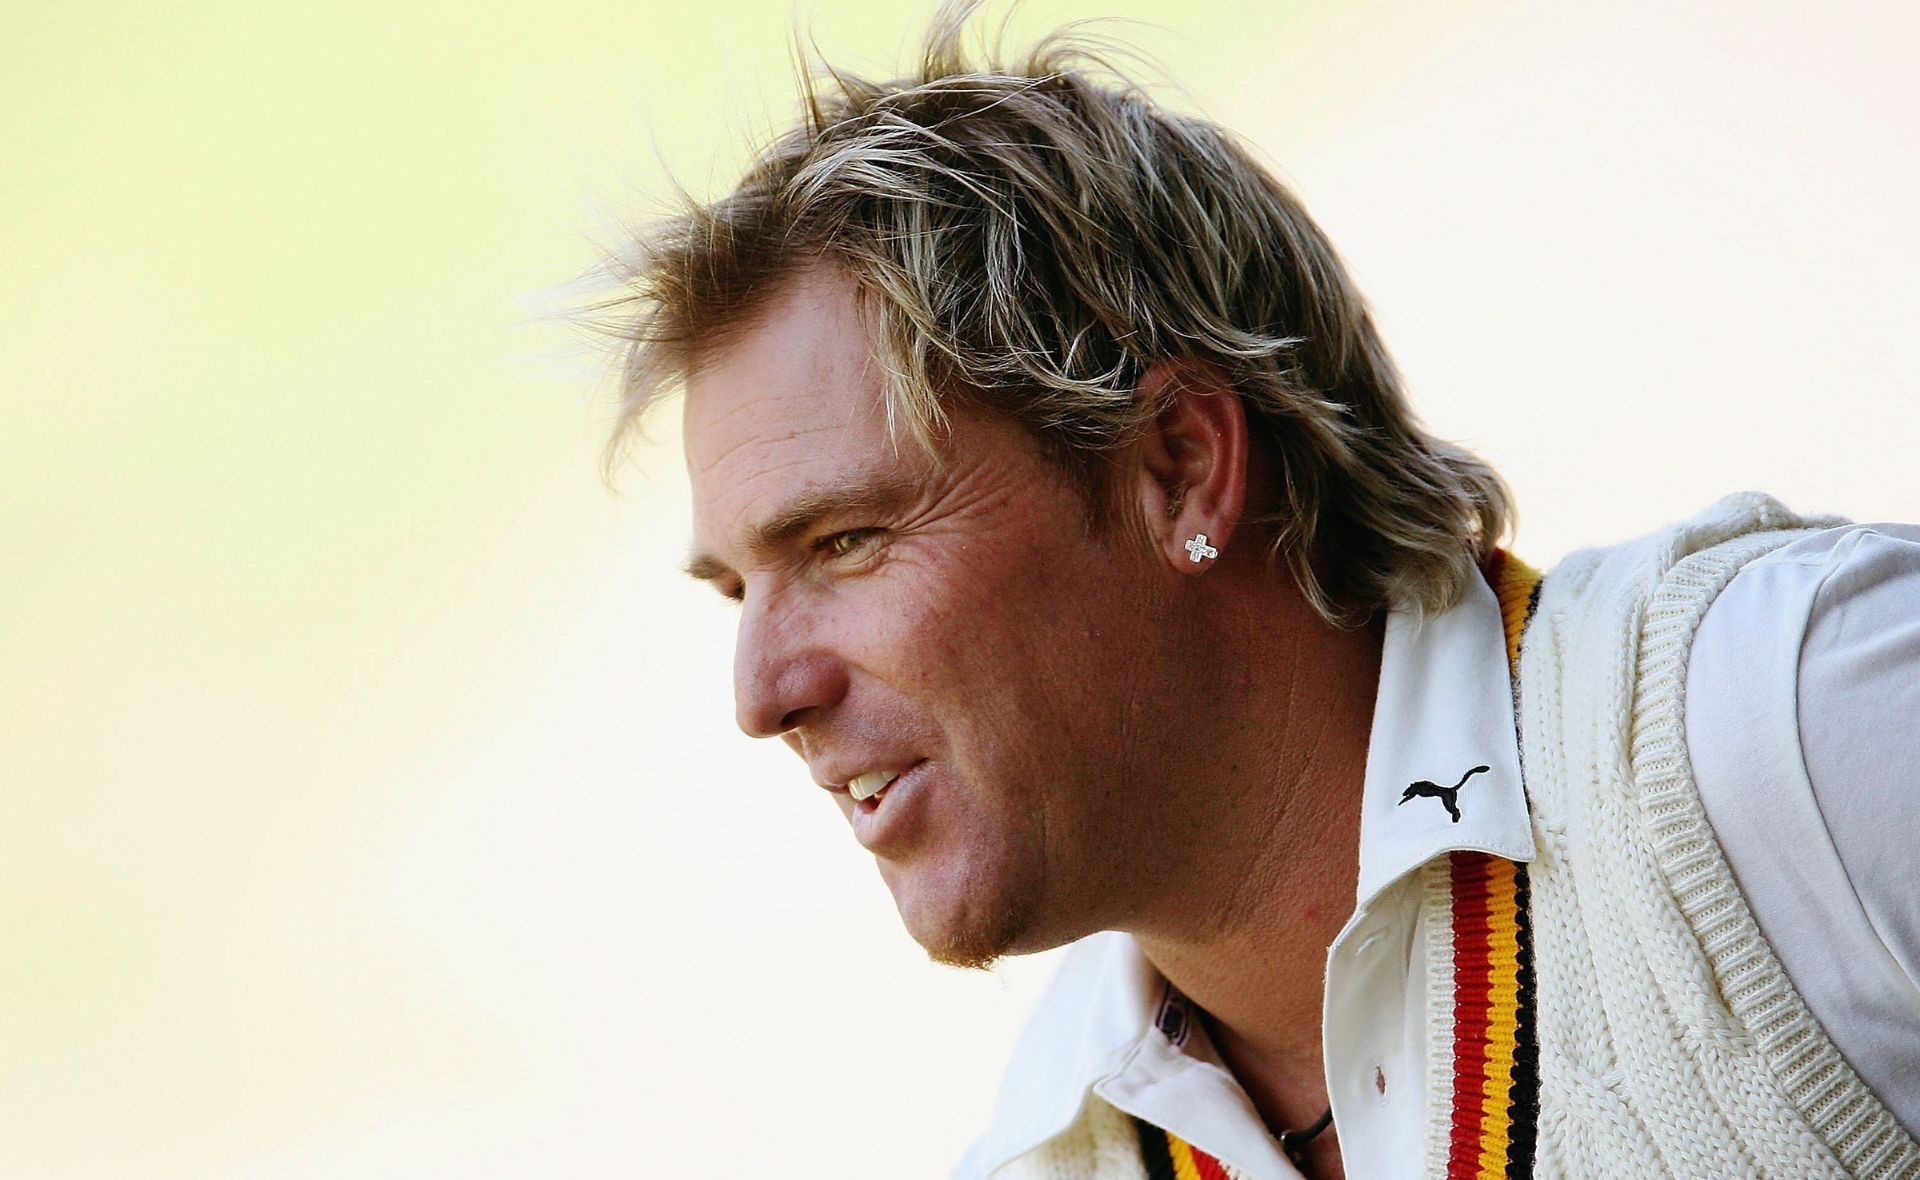 Shane Warne’s “legacy lives on” in touching tribute on what would have been his 53rd birthday